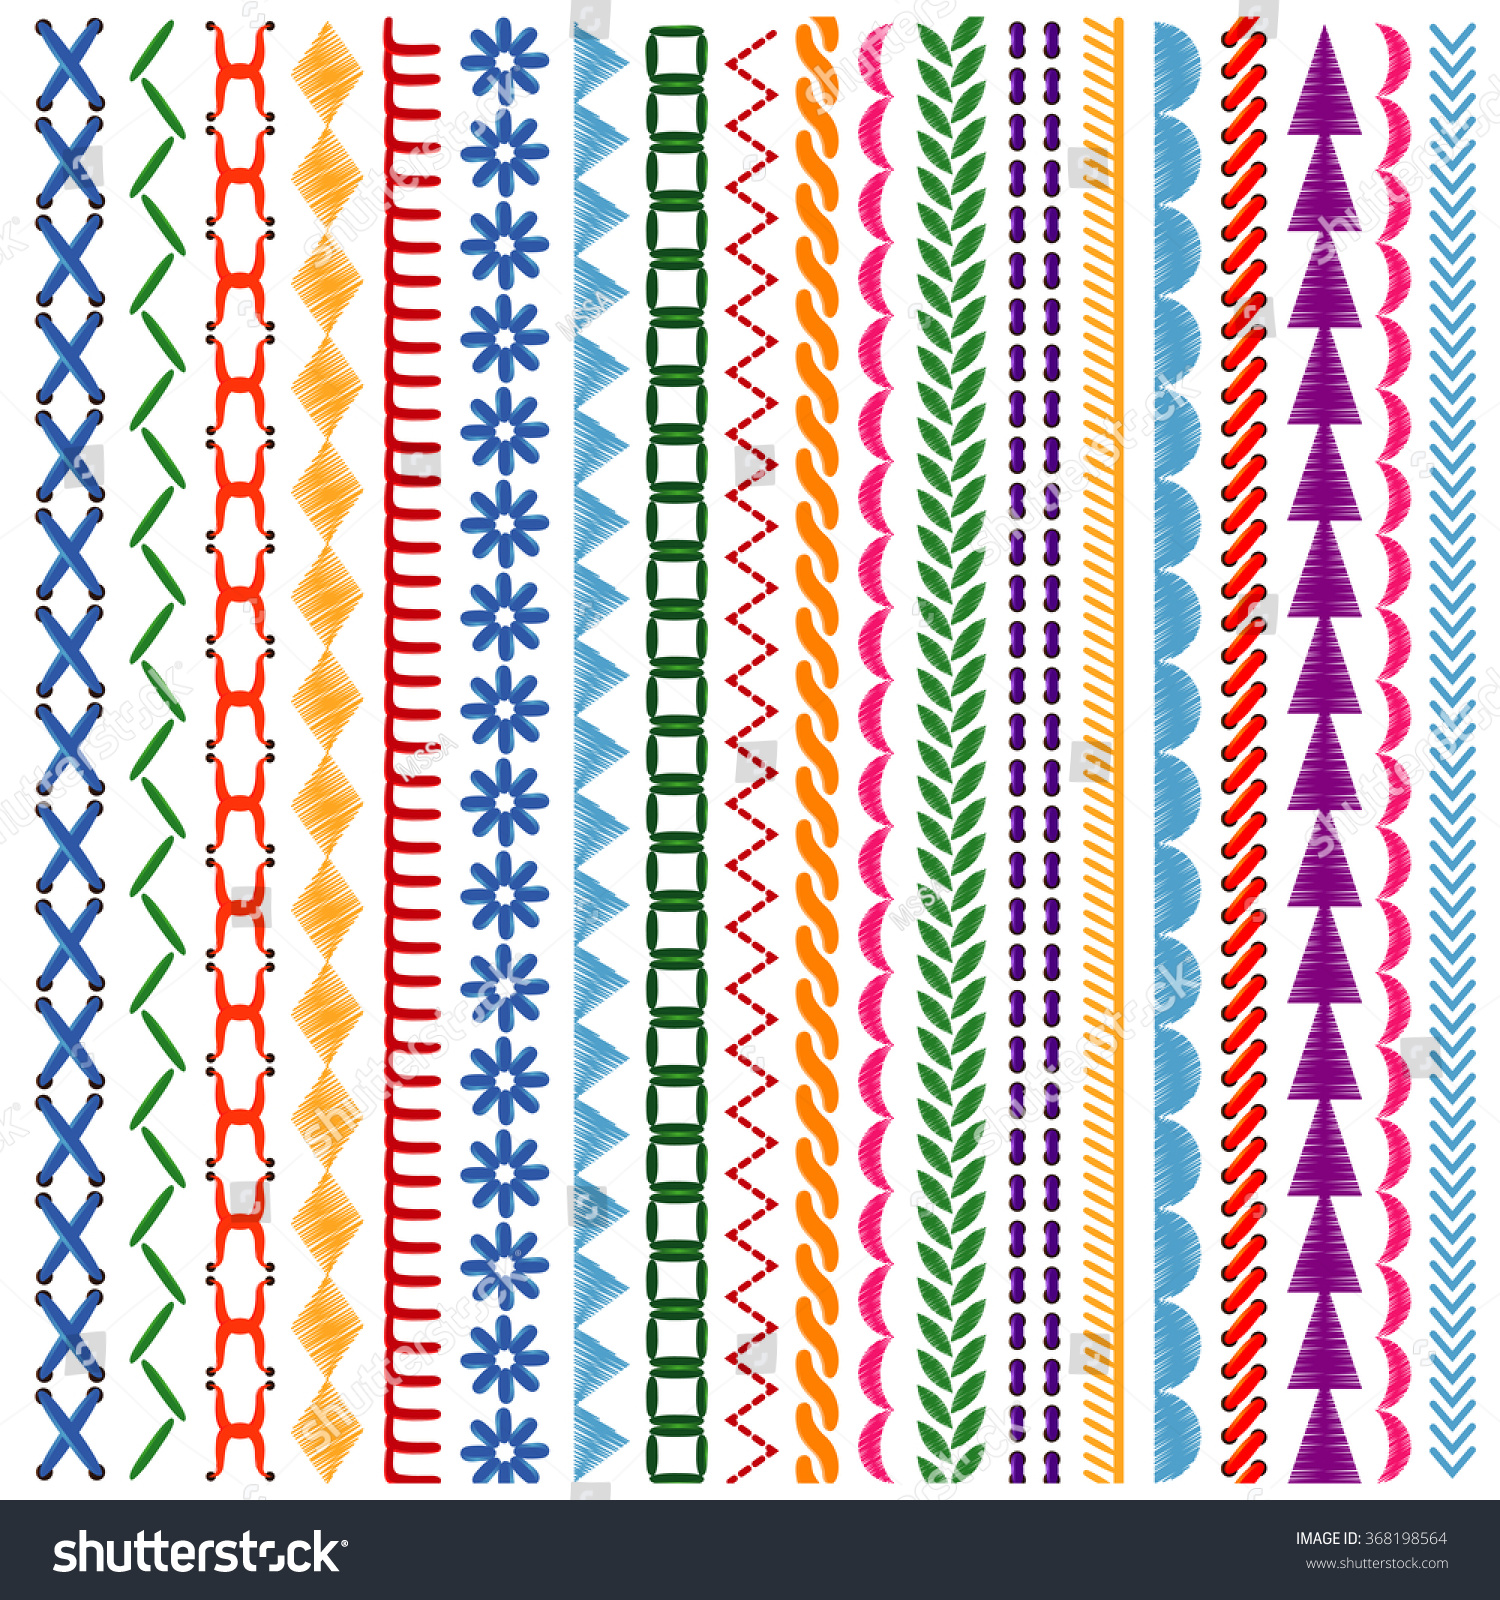 Embroidery Stitches Vector Seamless Patterns And Borders Set. Ethnic ...